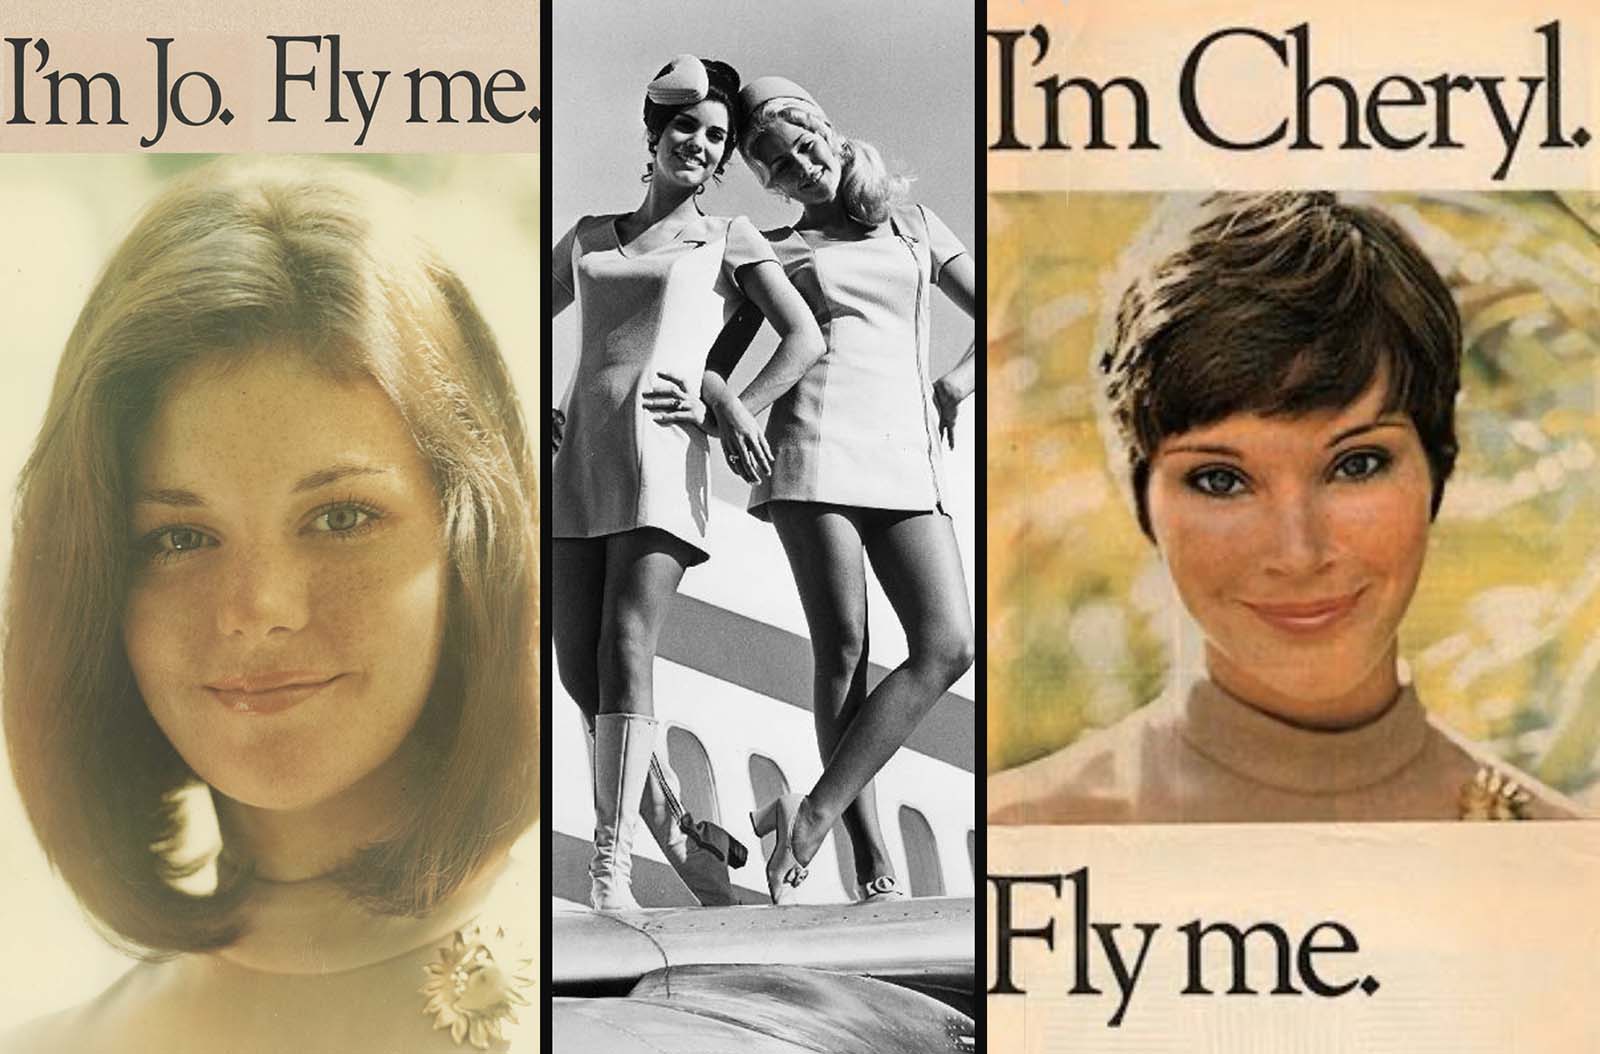 Vintage Photos from the Highly Controversial but Successful "Fly Me" Ad Campaign, 1970s